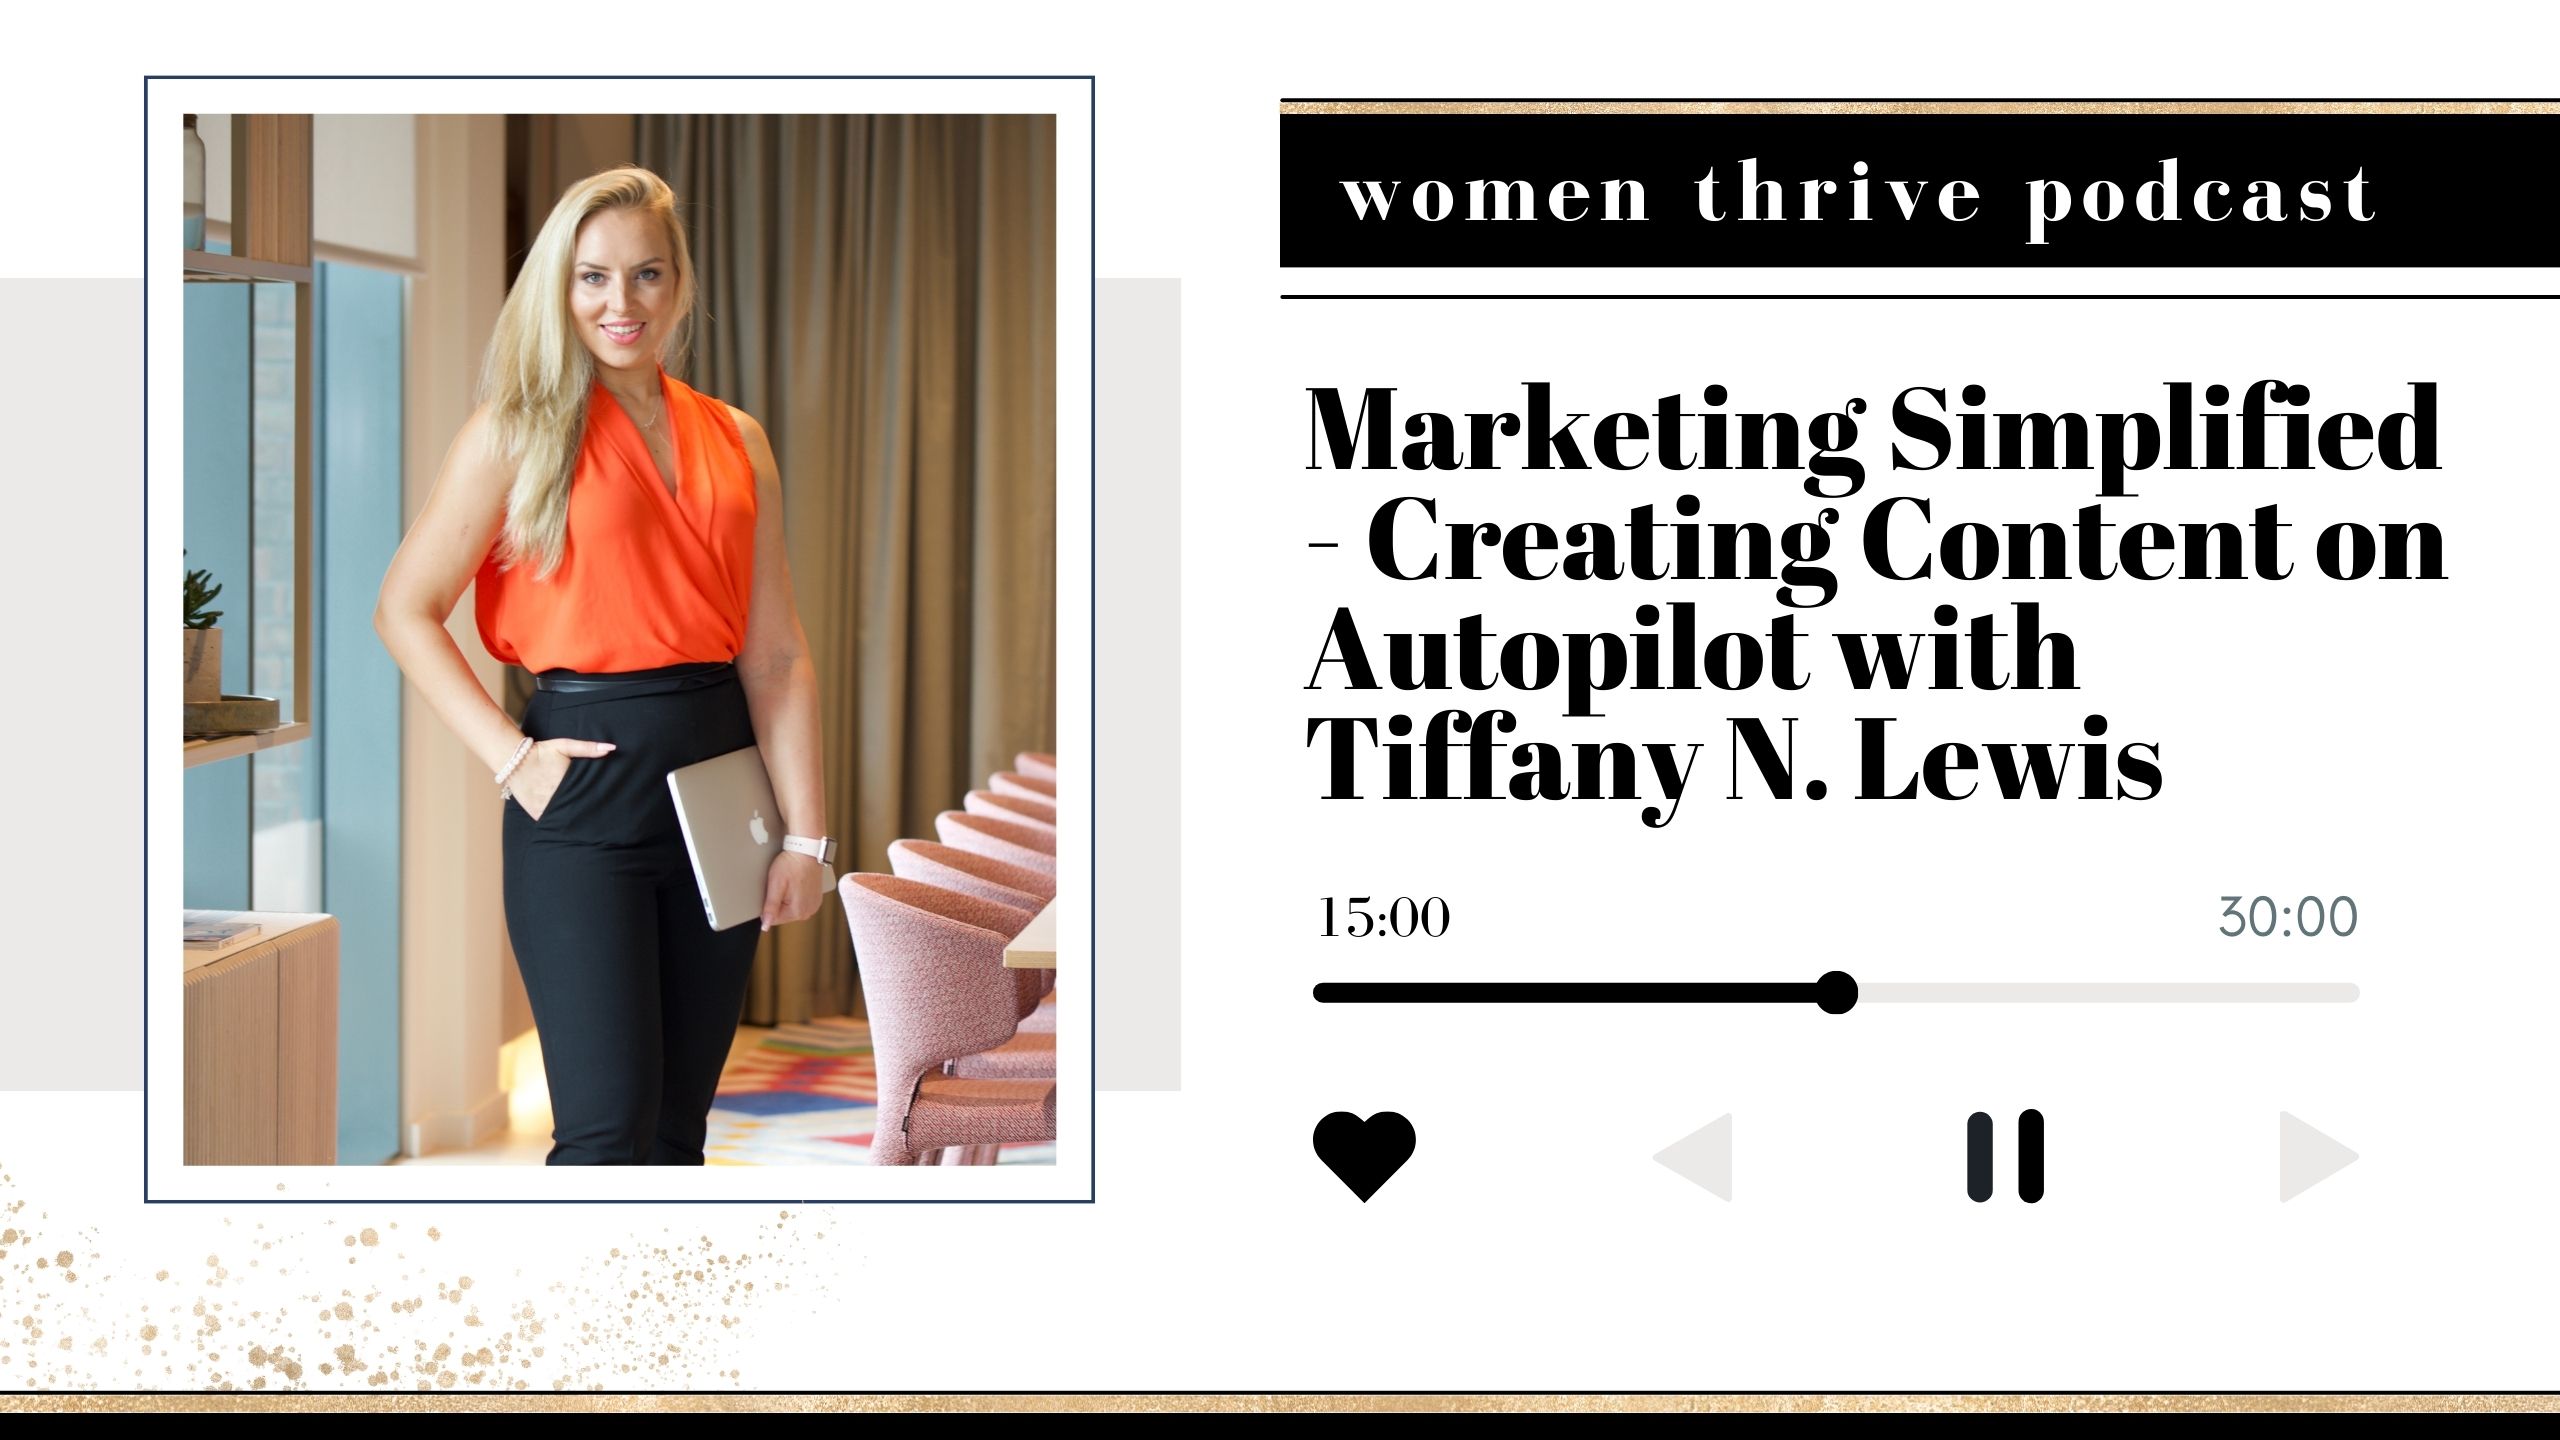 Marketing Simplified - Creating Content on Autopilot with Tiffany N. Lewis